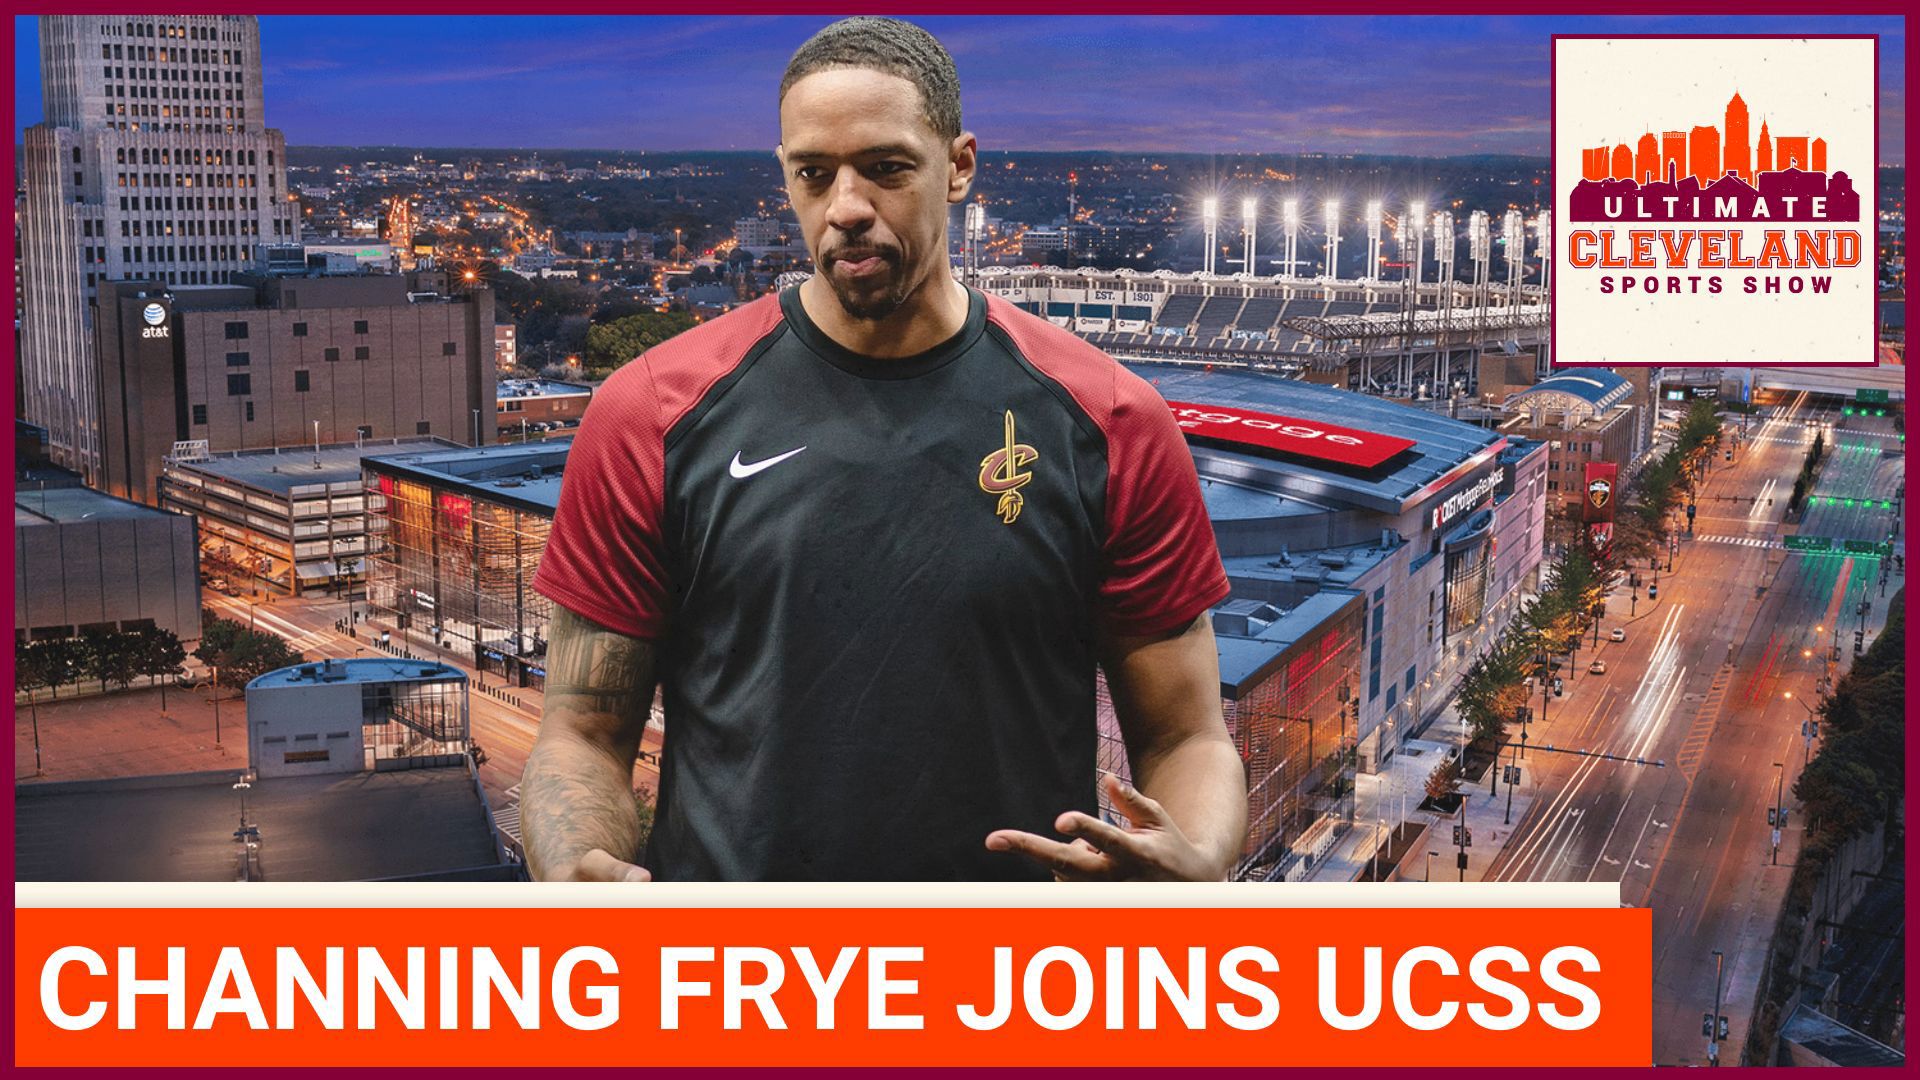 Former NBA Champion and Cleveland Cavalier Channing Frye joins UCSS